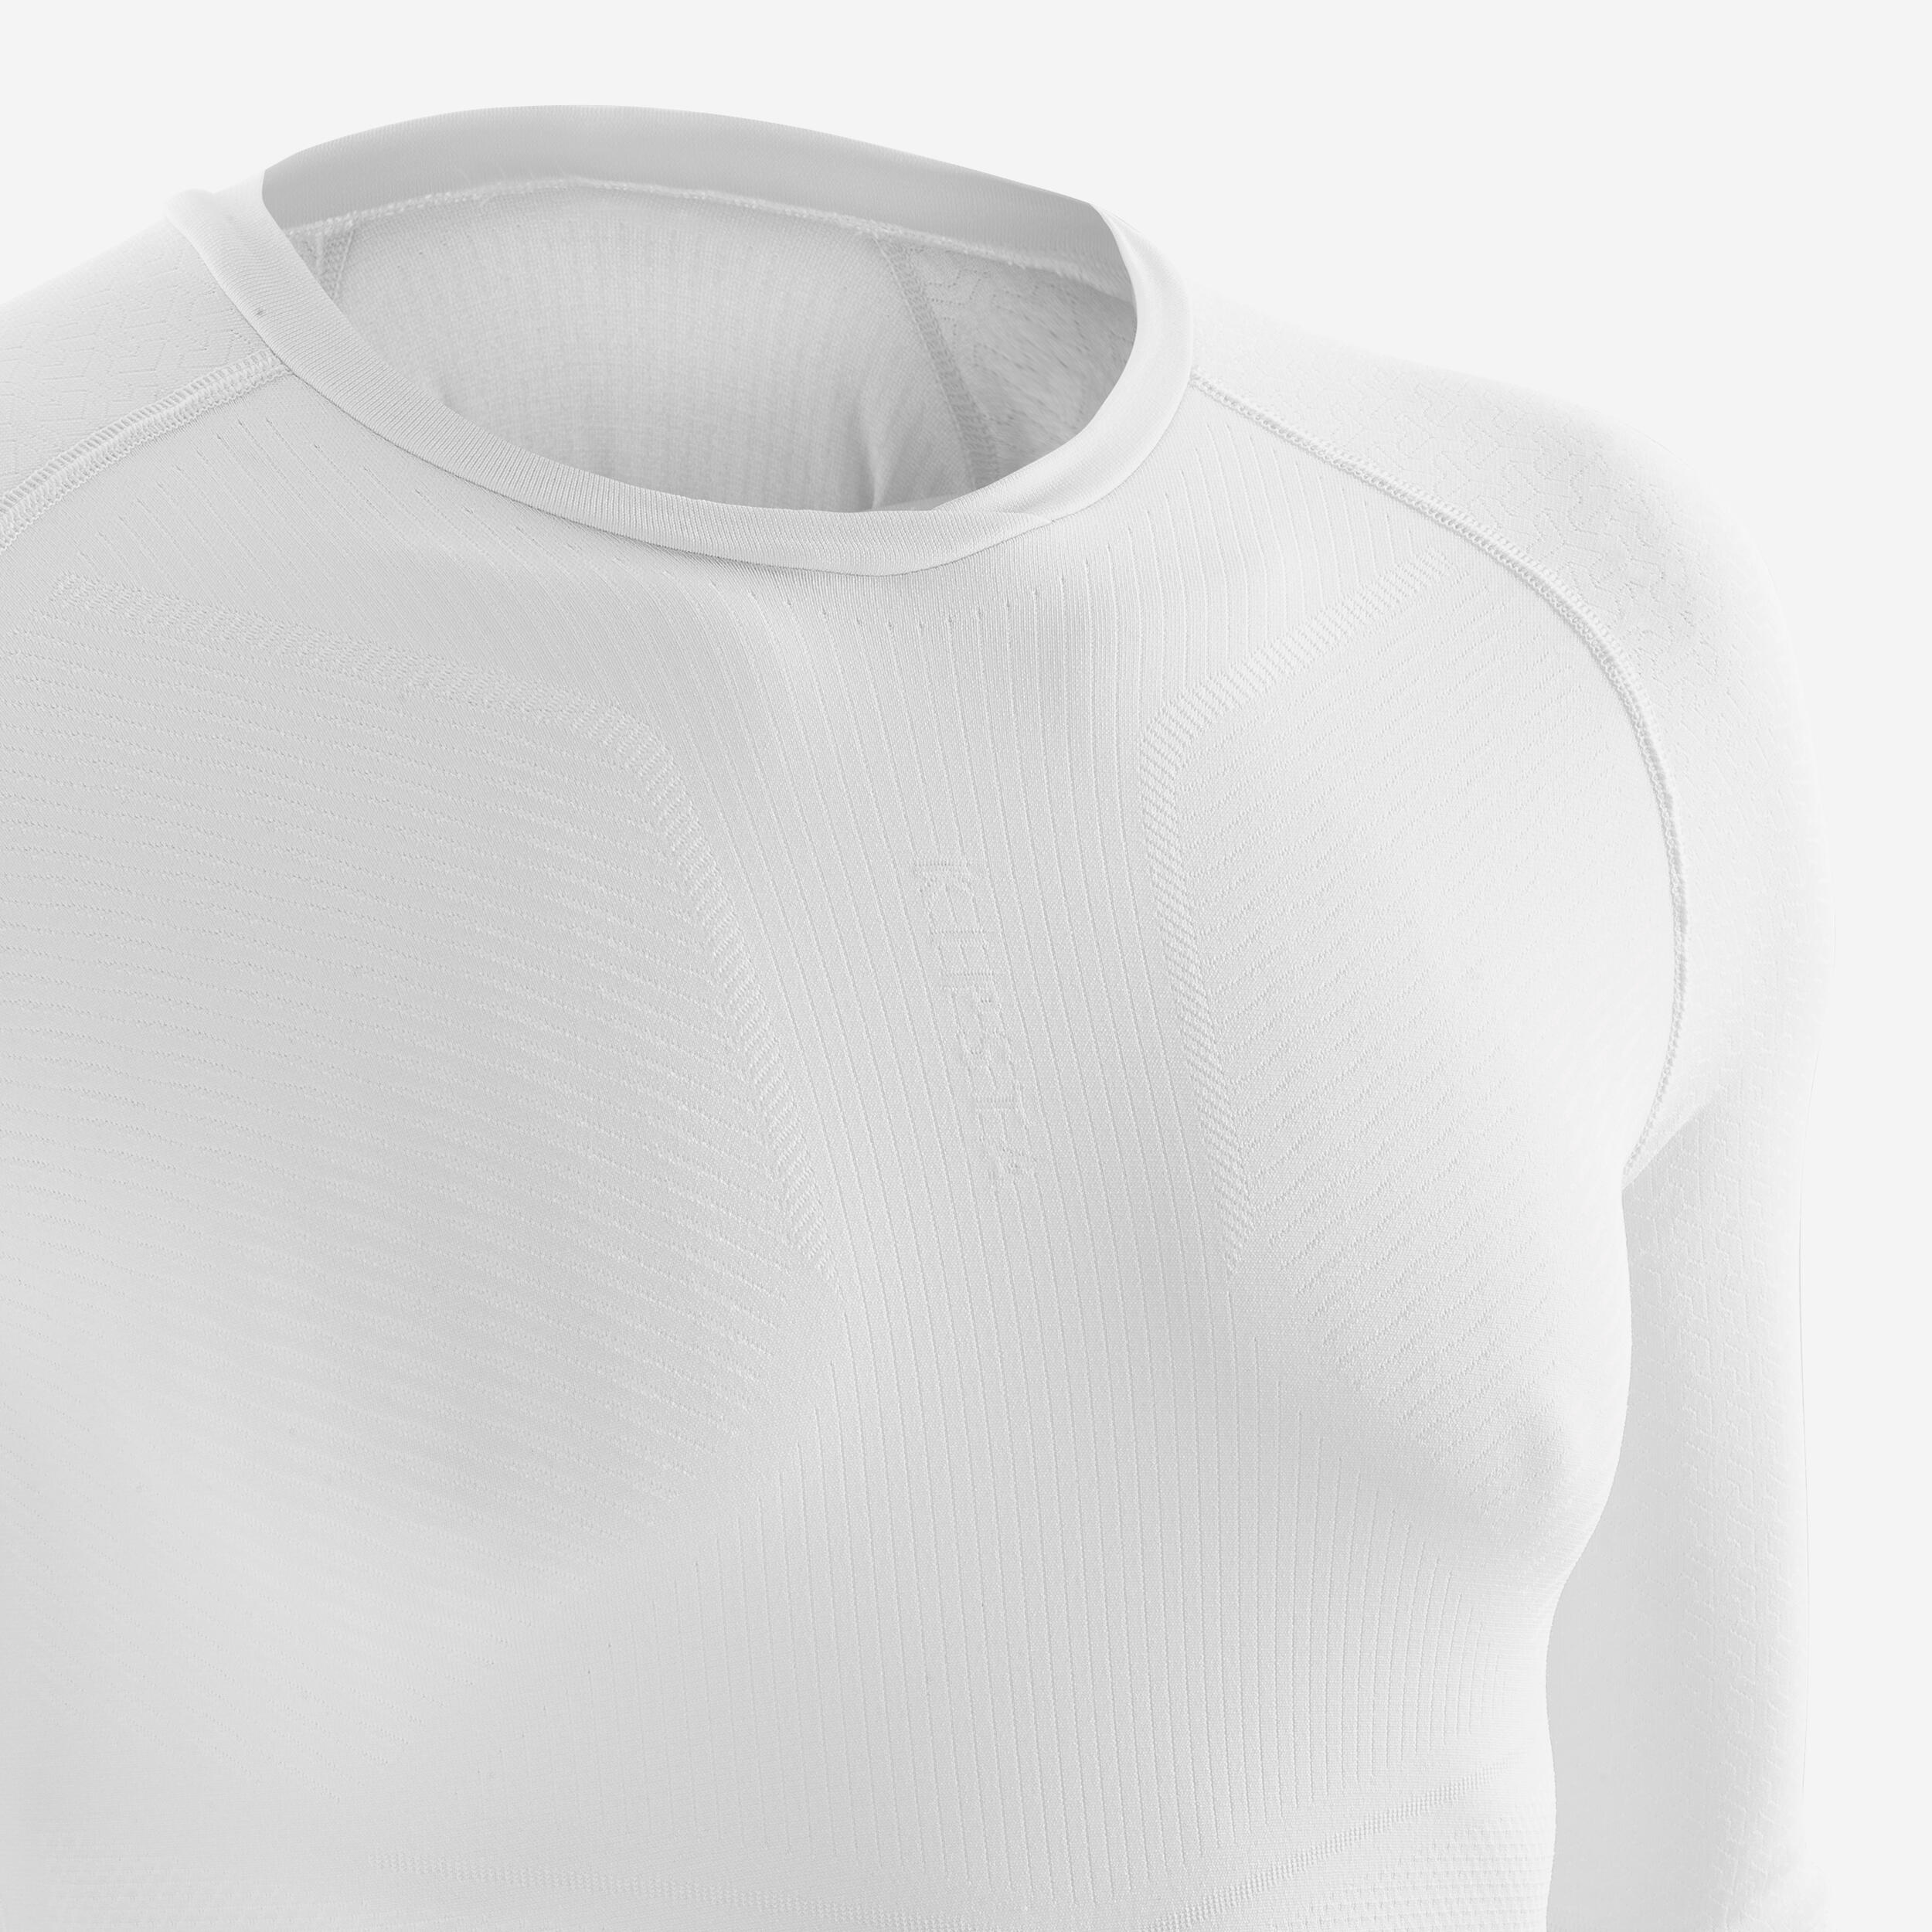 Adult Long-Sleeved Thermal Base Layer Top Keepdry 500 - White 10/13